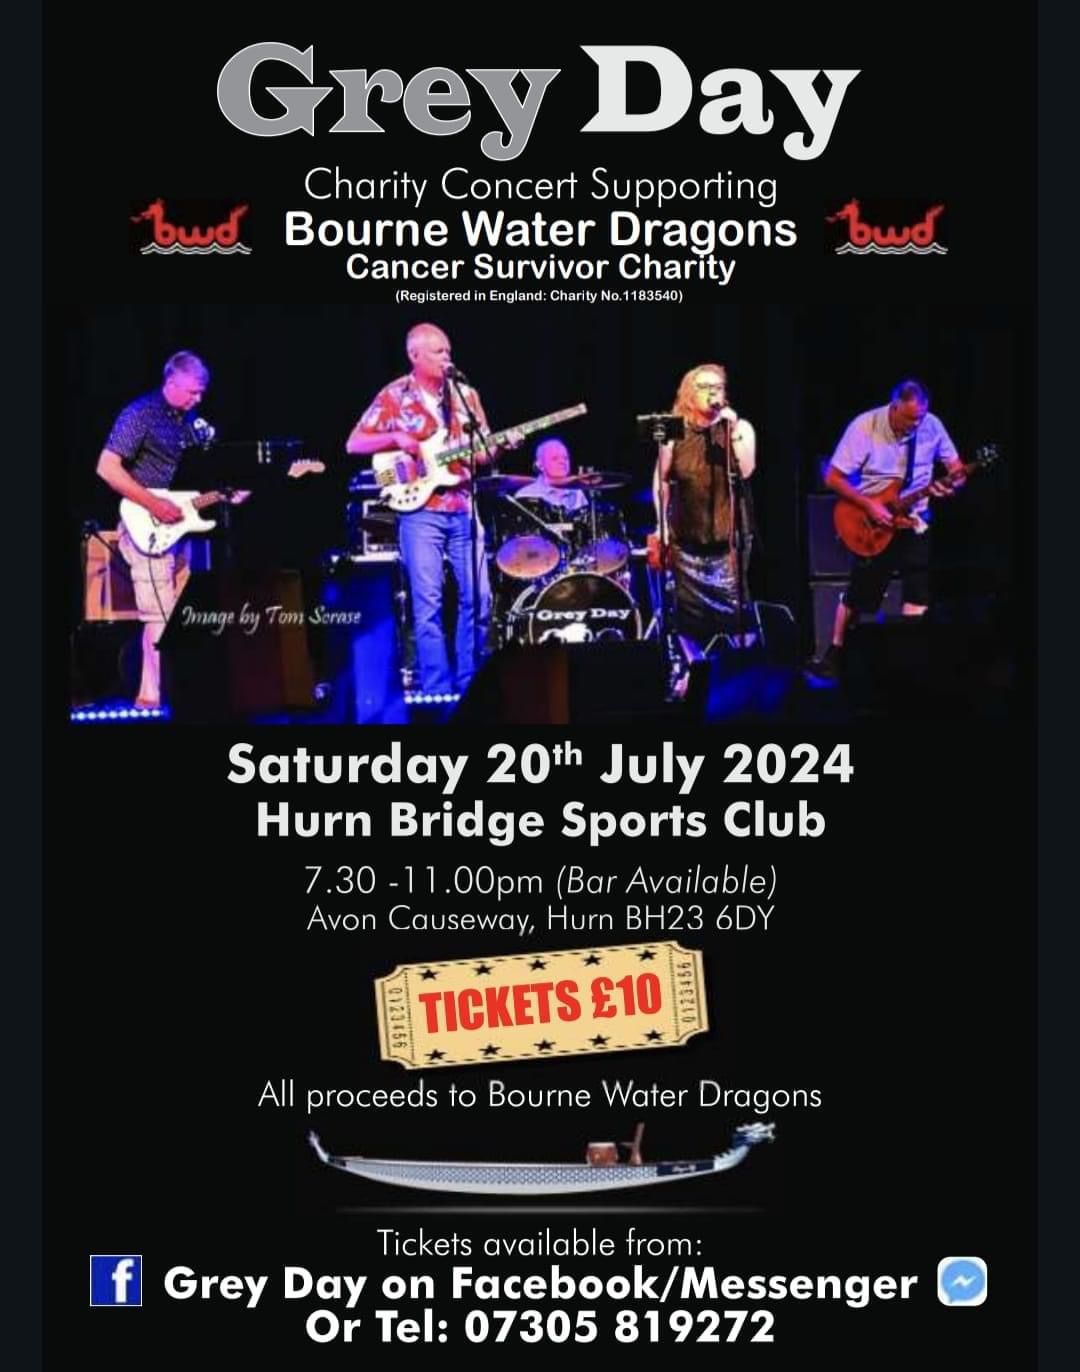 Music evening in aid of Bourne Water Dragons